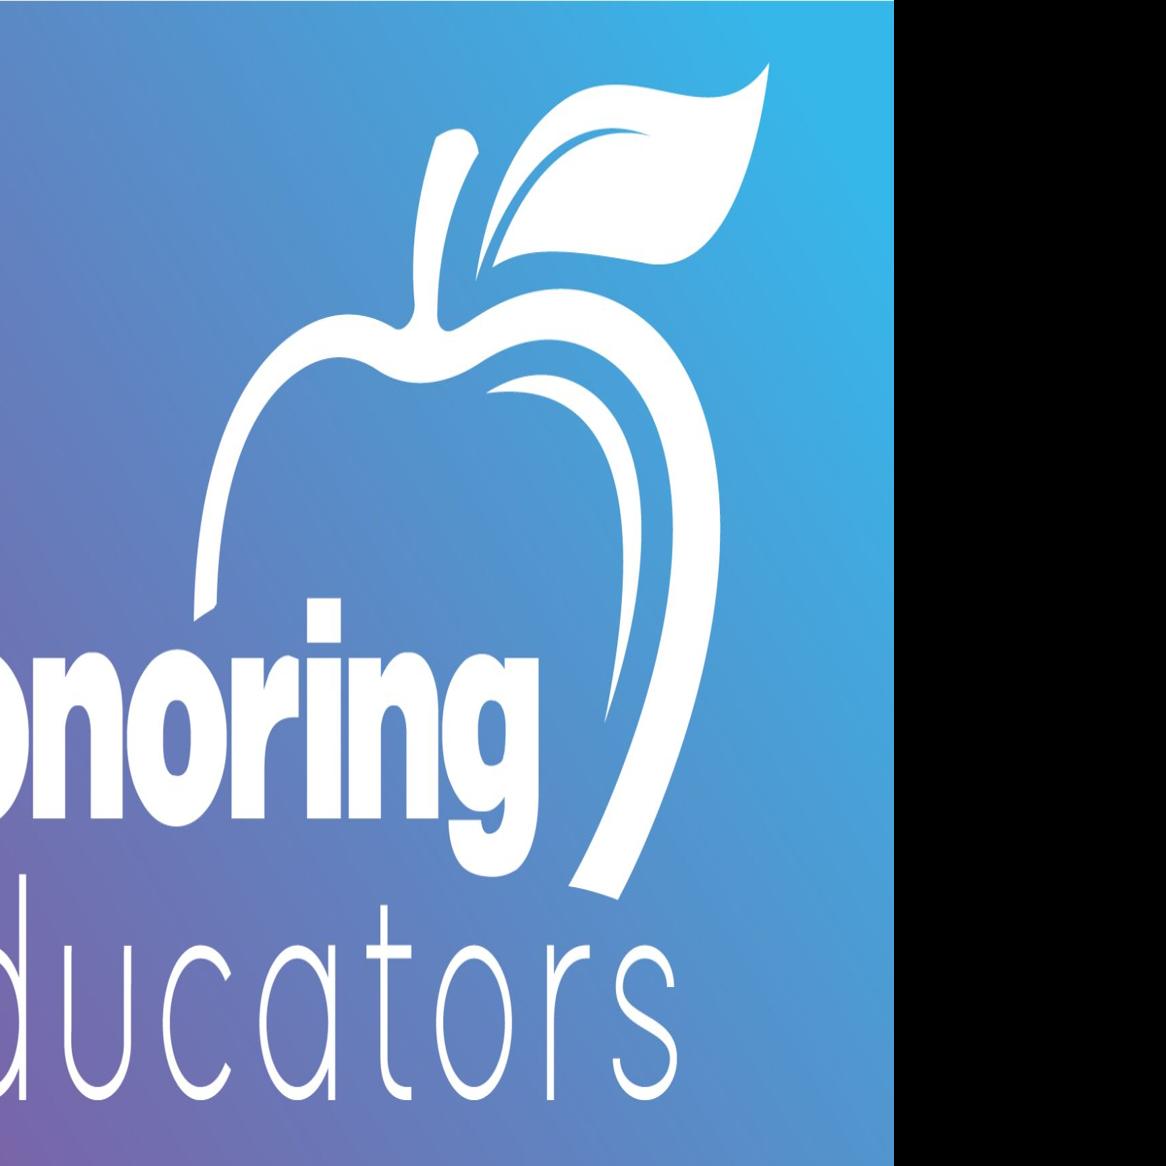 Bright red apples for Kern County educators